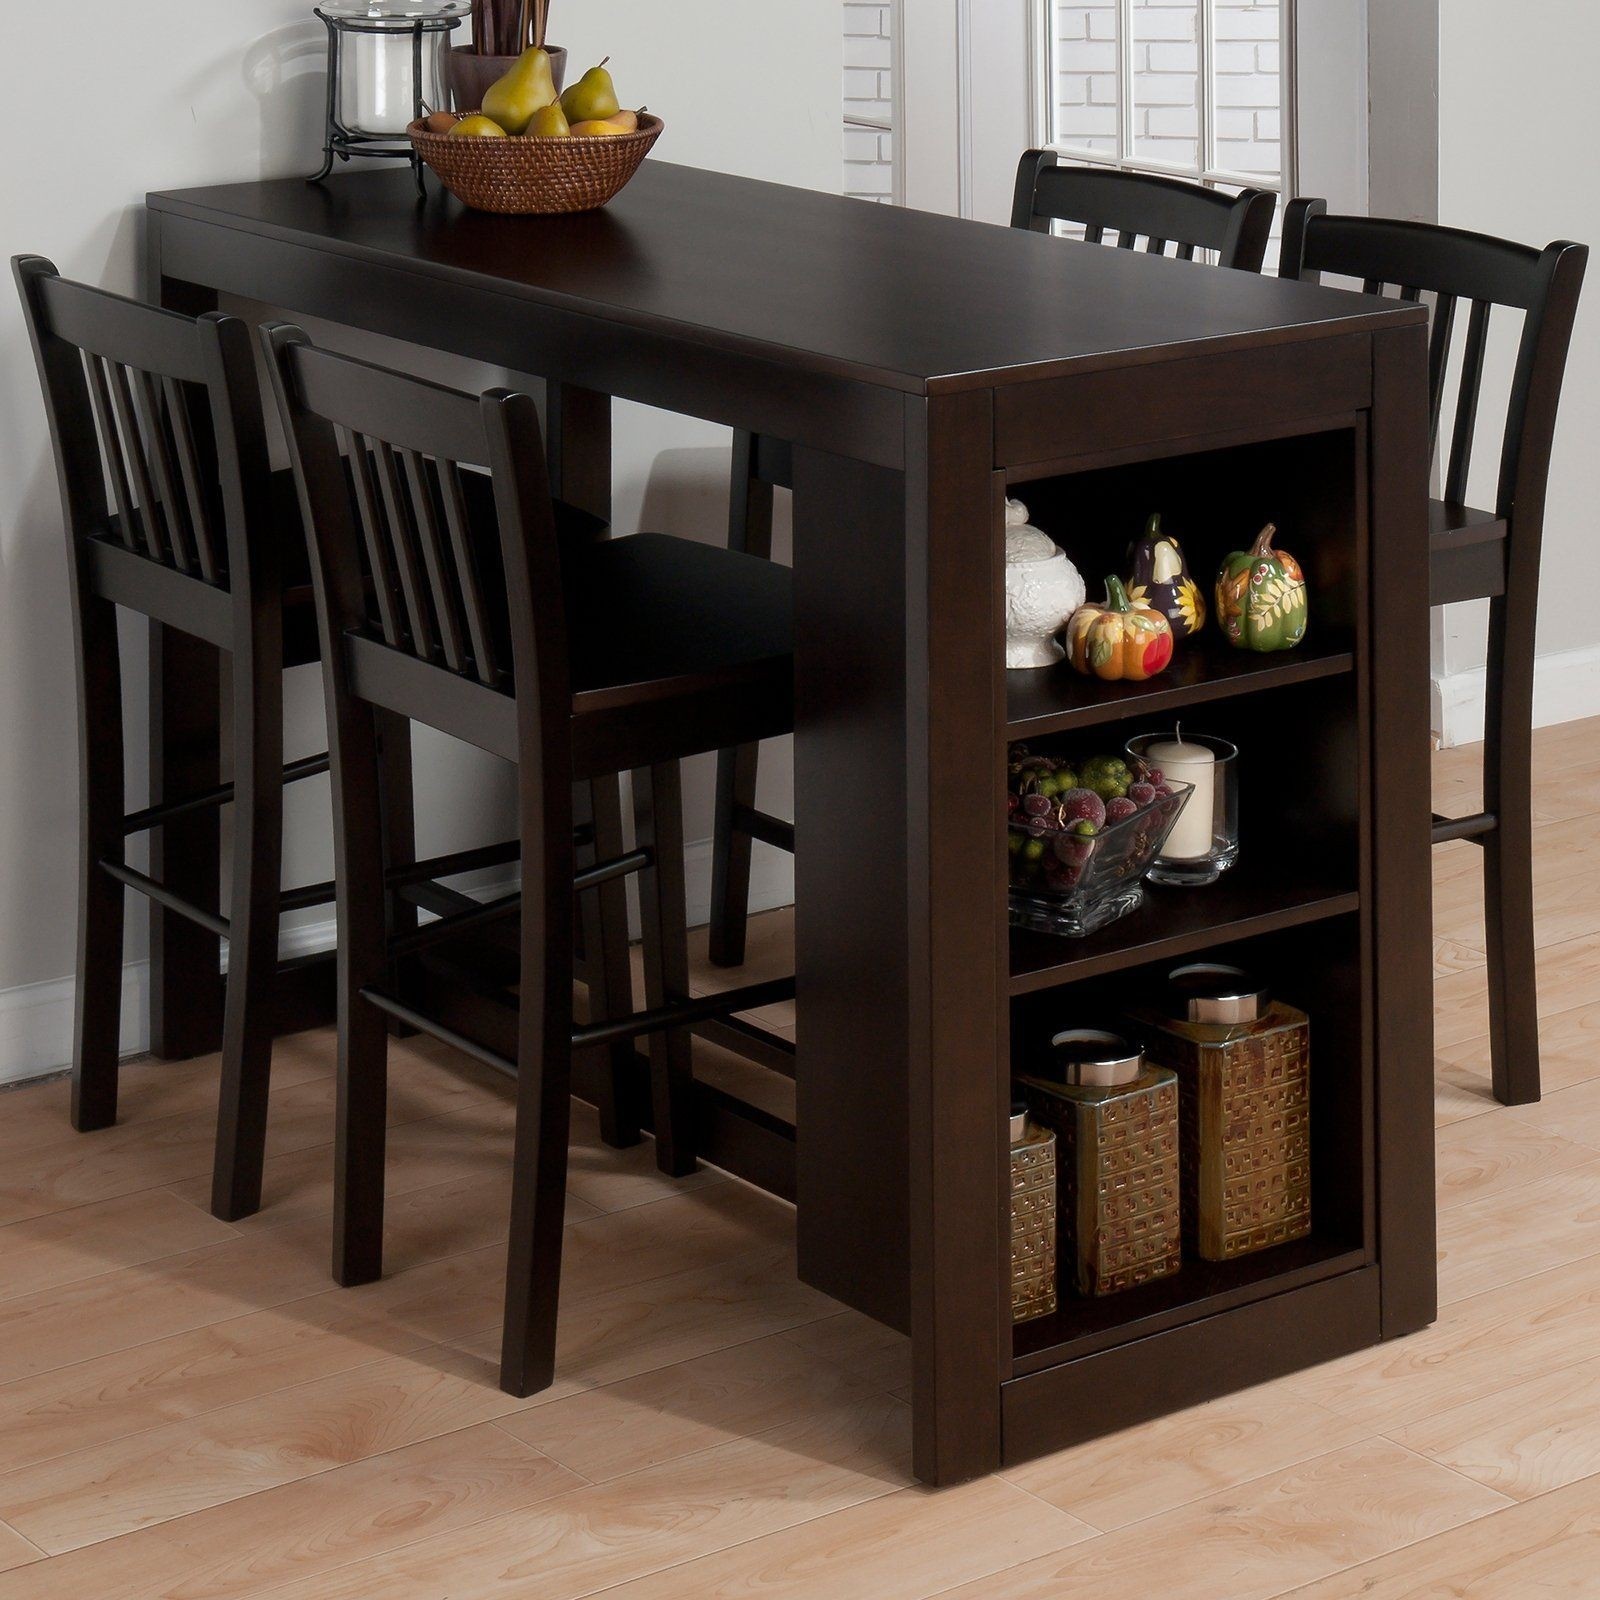 Small dining set for 4